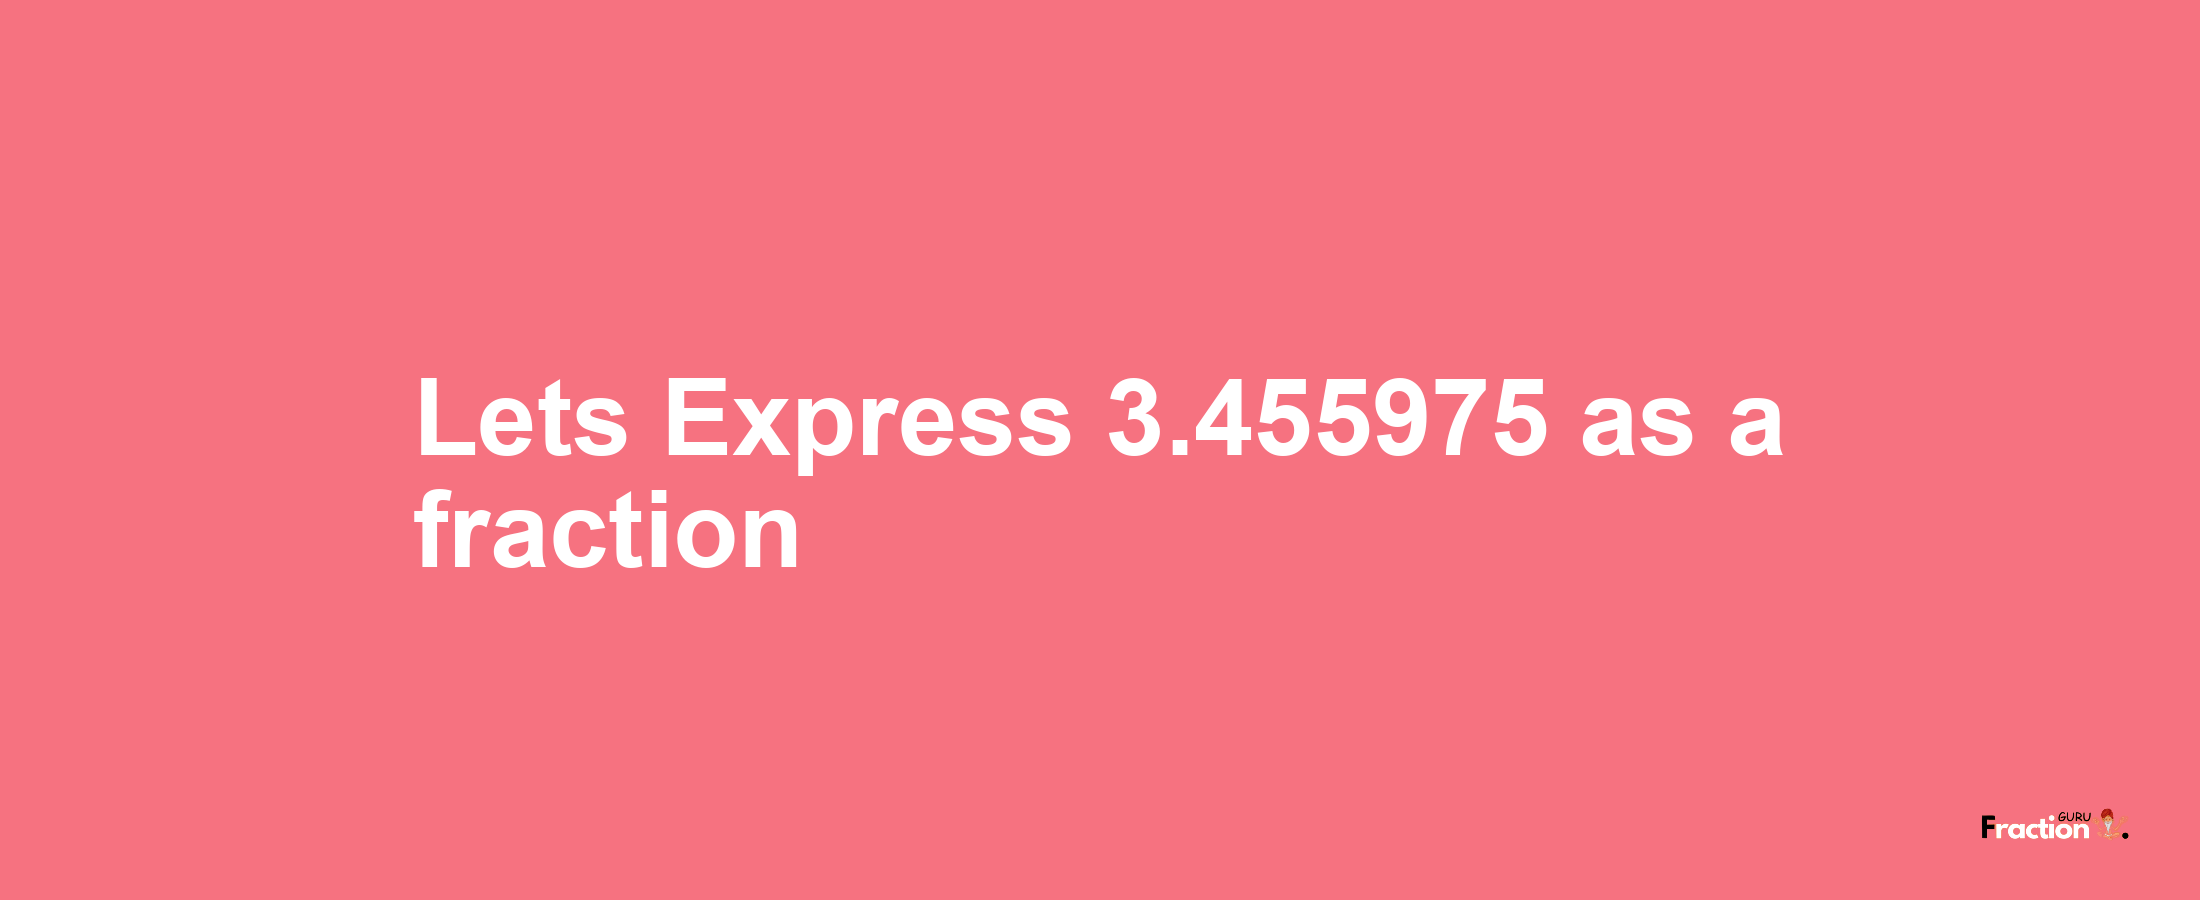 Lets Express 3.455975 as afraction